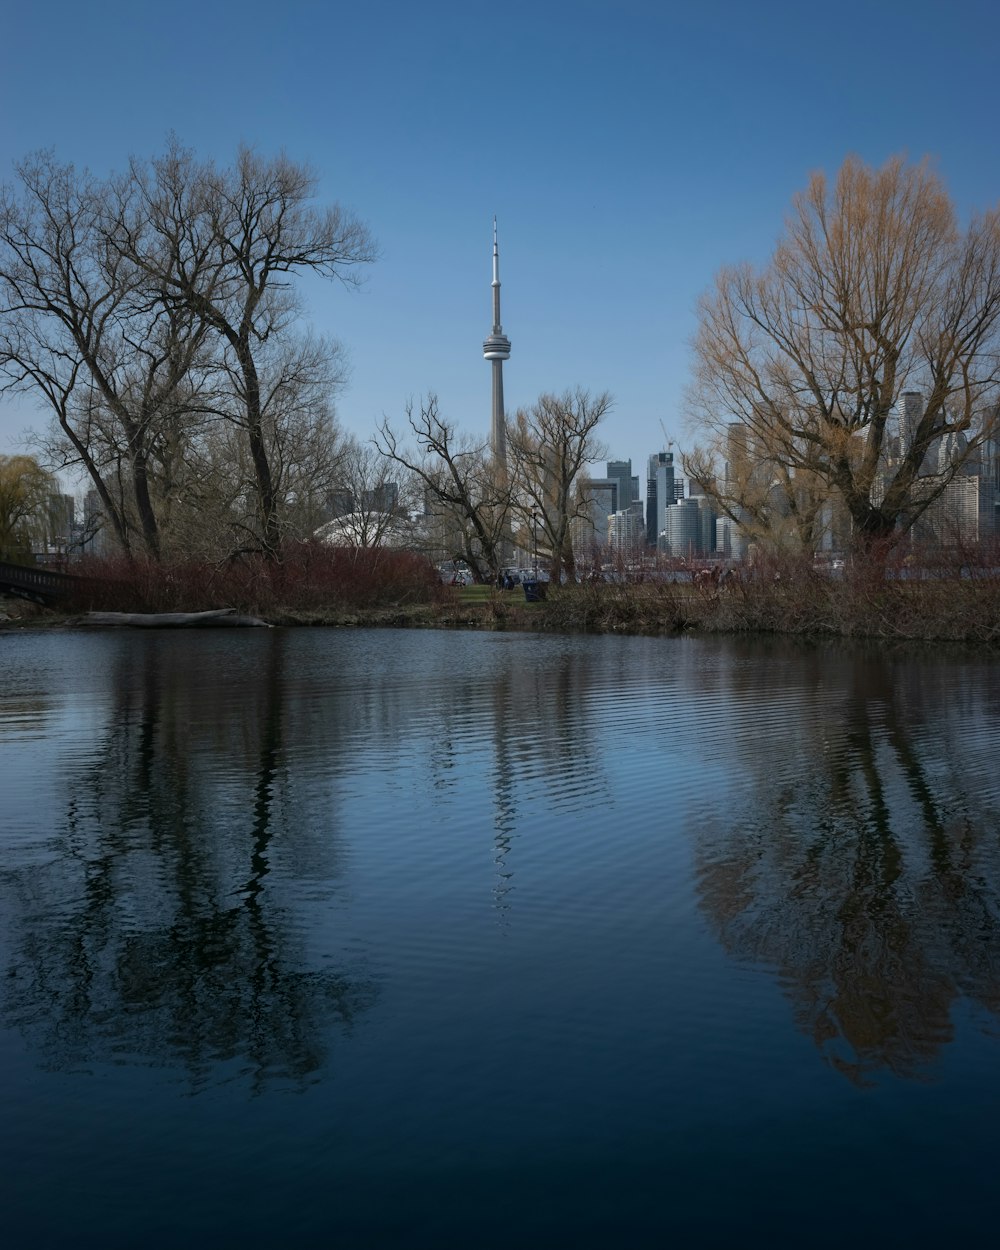 a body of water with trees and a city in the background